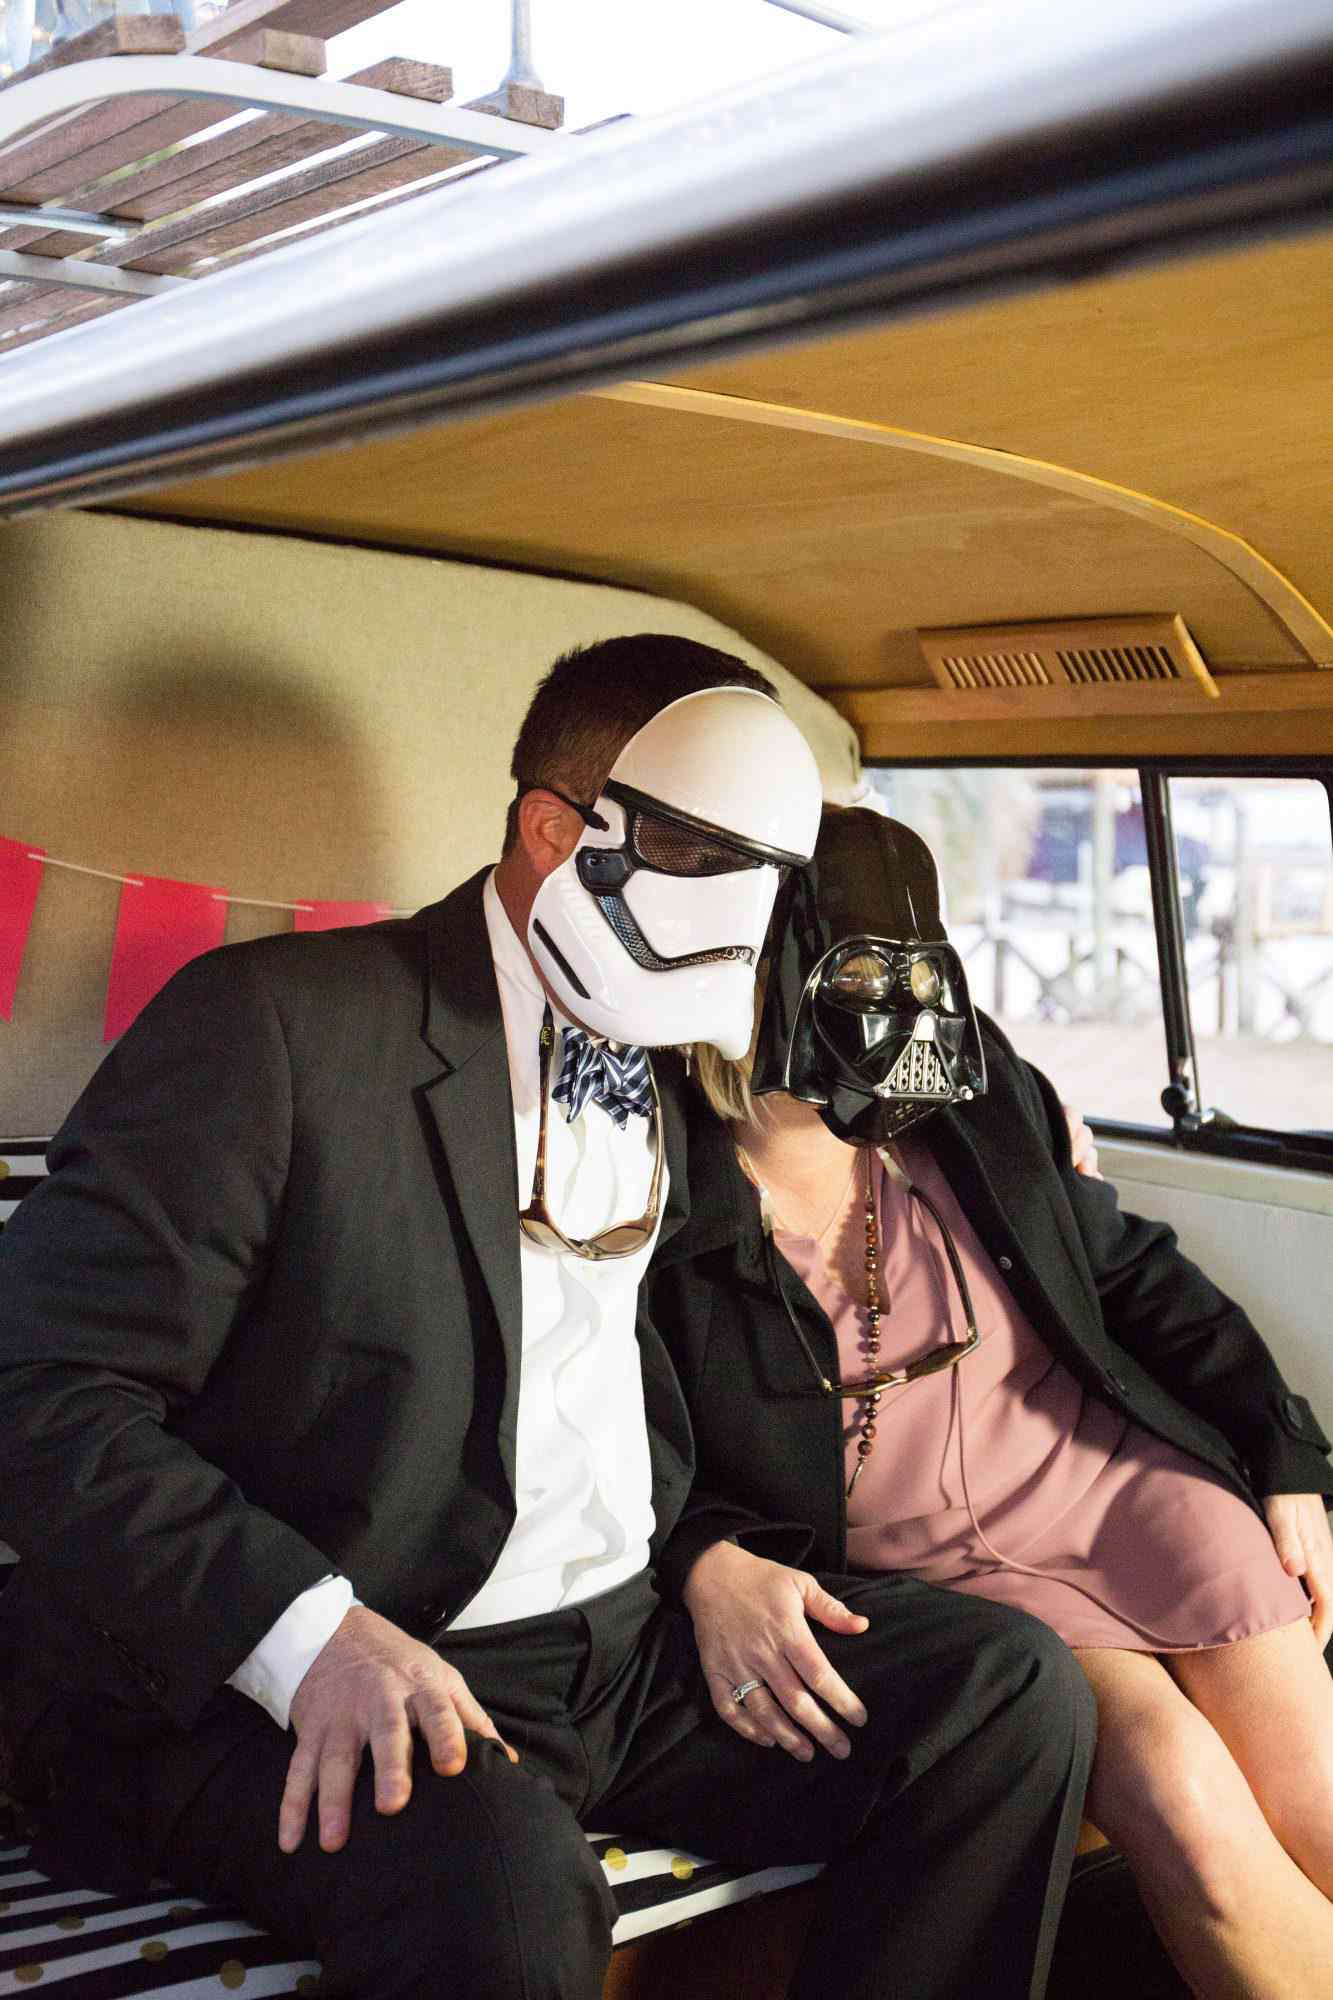 photo prob star wars face mask couple inside bus